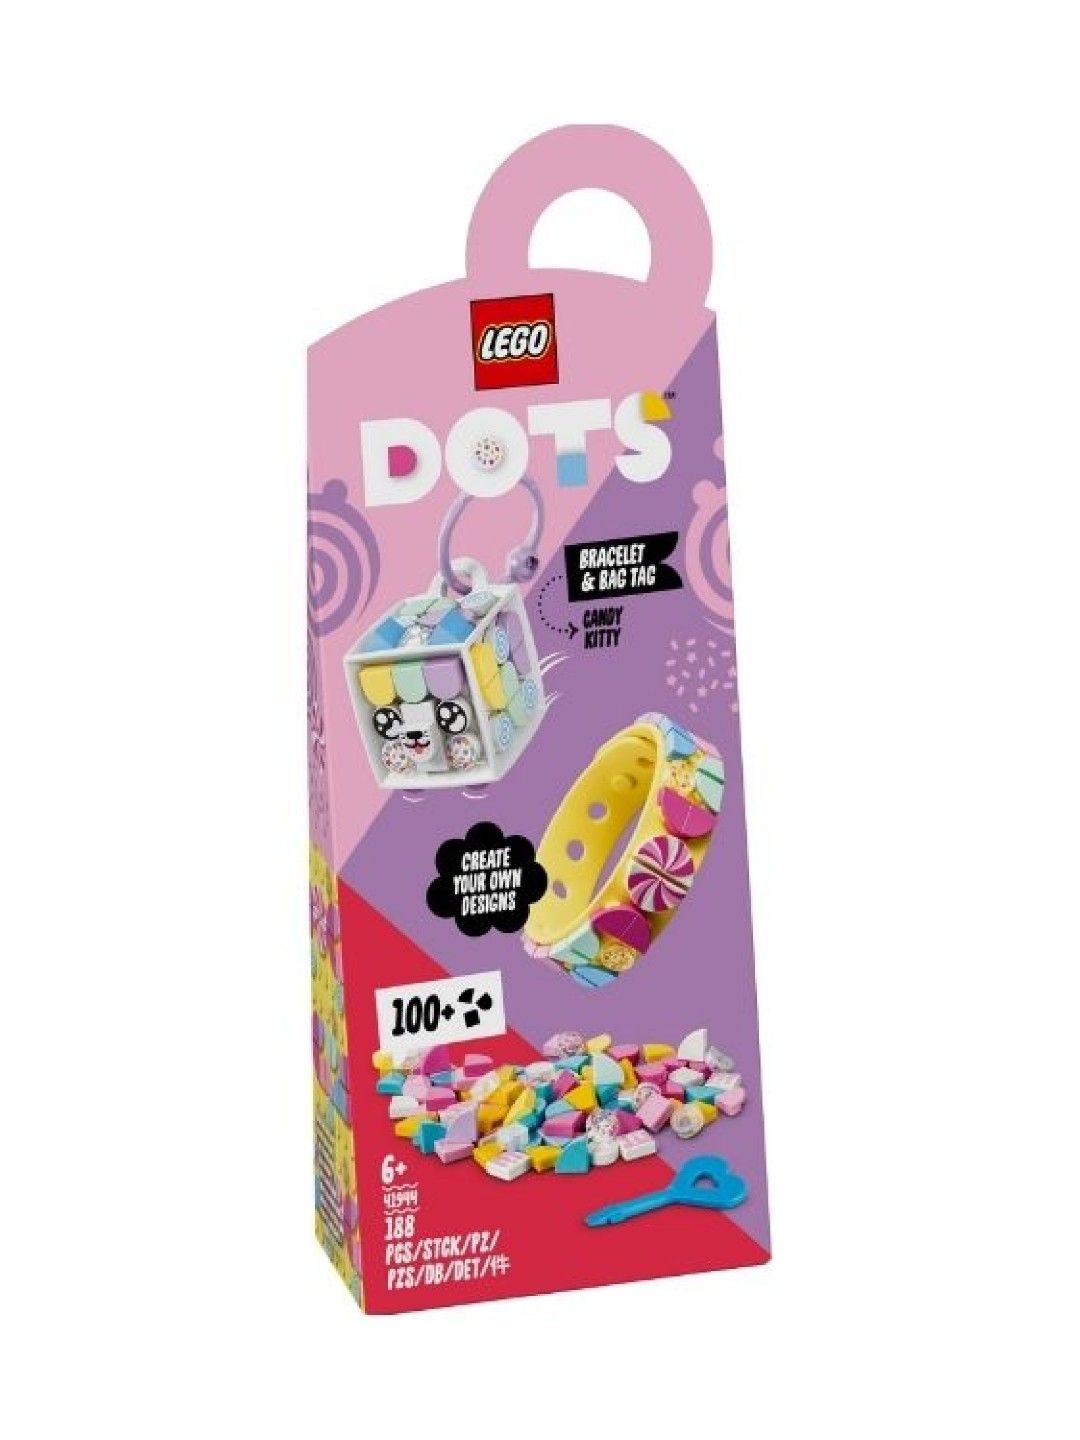 Lego Dots Candy Kitty Bracelet & Bag Tag (Top 10)